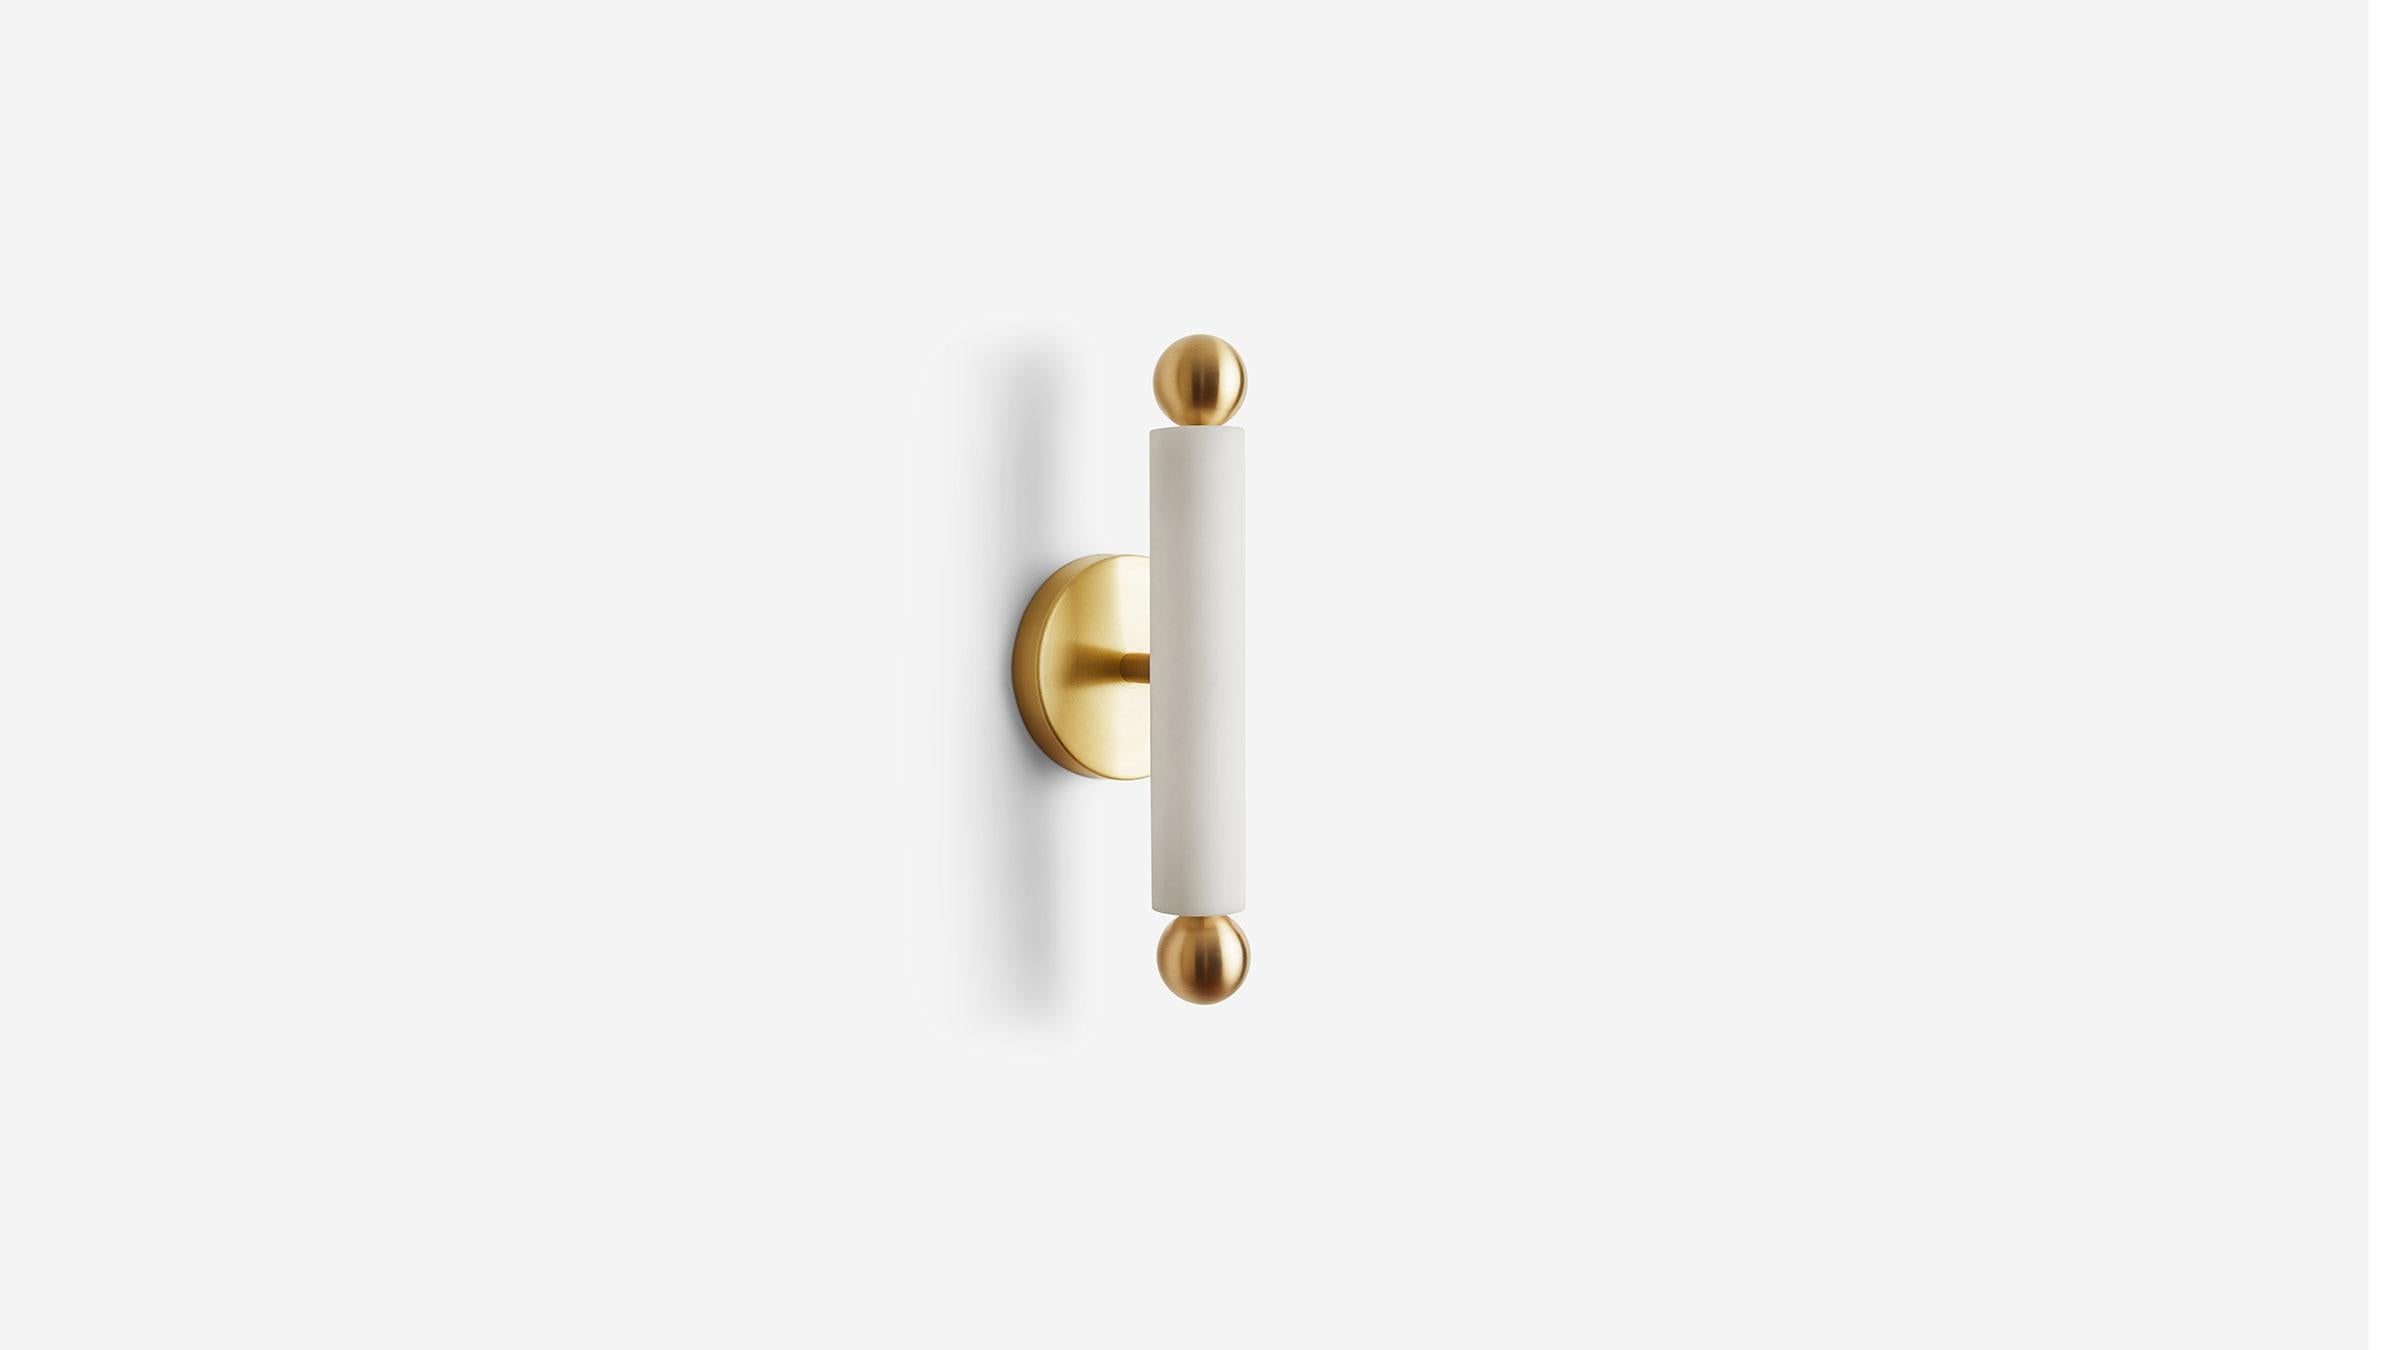 TUBE SCONCE SMALL is both intimately scaled and luminously impactful. With a bold yet compact beam of light this fixture is well suited to small and large spaces alike. ADA compliant. UL Listed. Damp Rated.